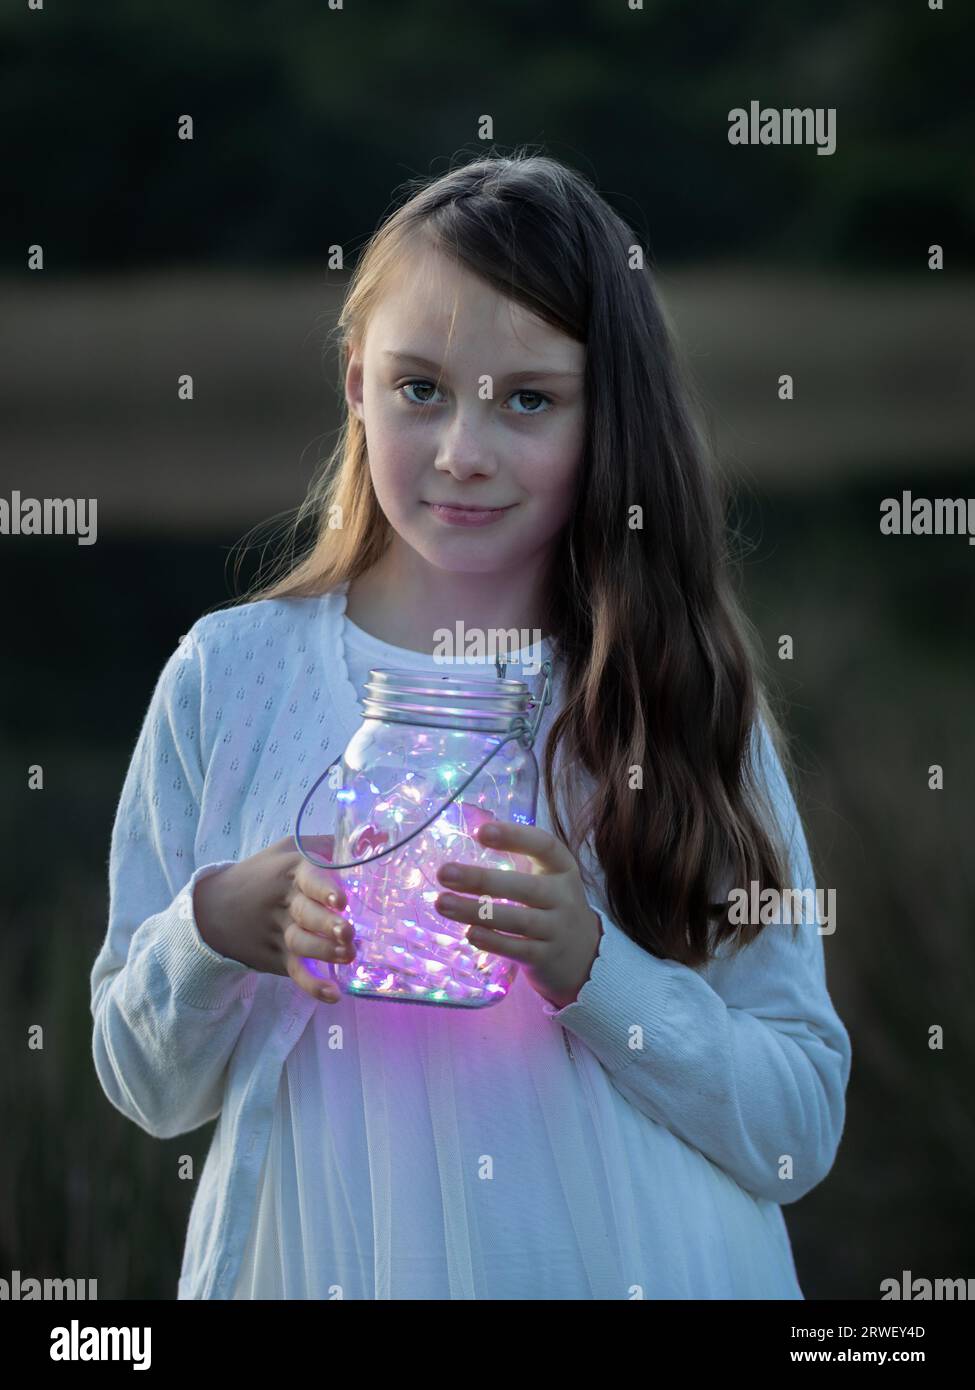 Close-up portrait of a young girl looking at the camera, holding a glass jar with fairy lights at dusk Stock Photo